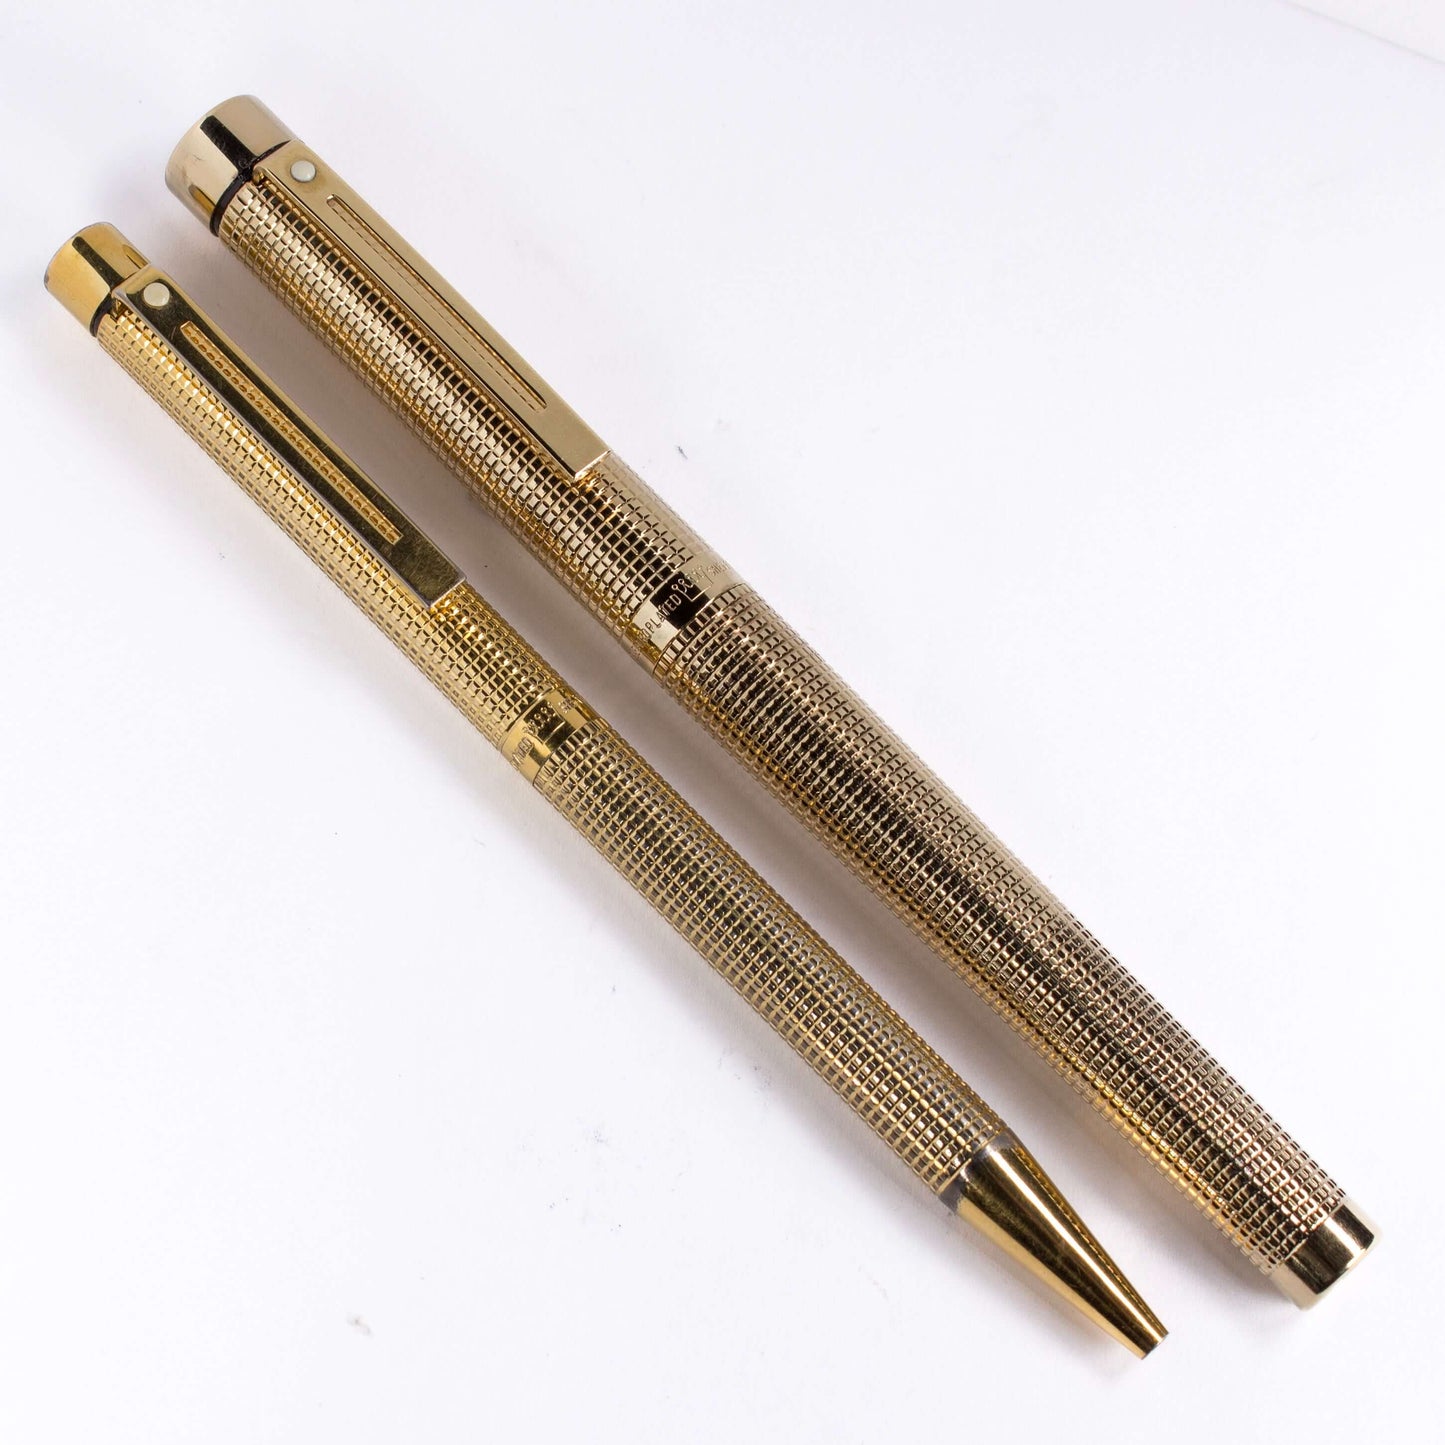 ${titleName/Type: Sheaffer Targa Fountain Pen/Ballpoint Set Manufacture Year: 1980's Length: 5 5/16 Filling System: Sheaffer Cartridge or Converter Color/Pattern: Gold Plated Basket Weave Nib Type/Condition and remarks: Fine 14K Inlaid Nib Condition: ﻿Exc